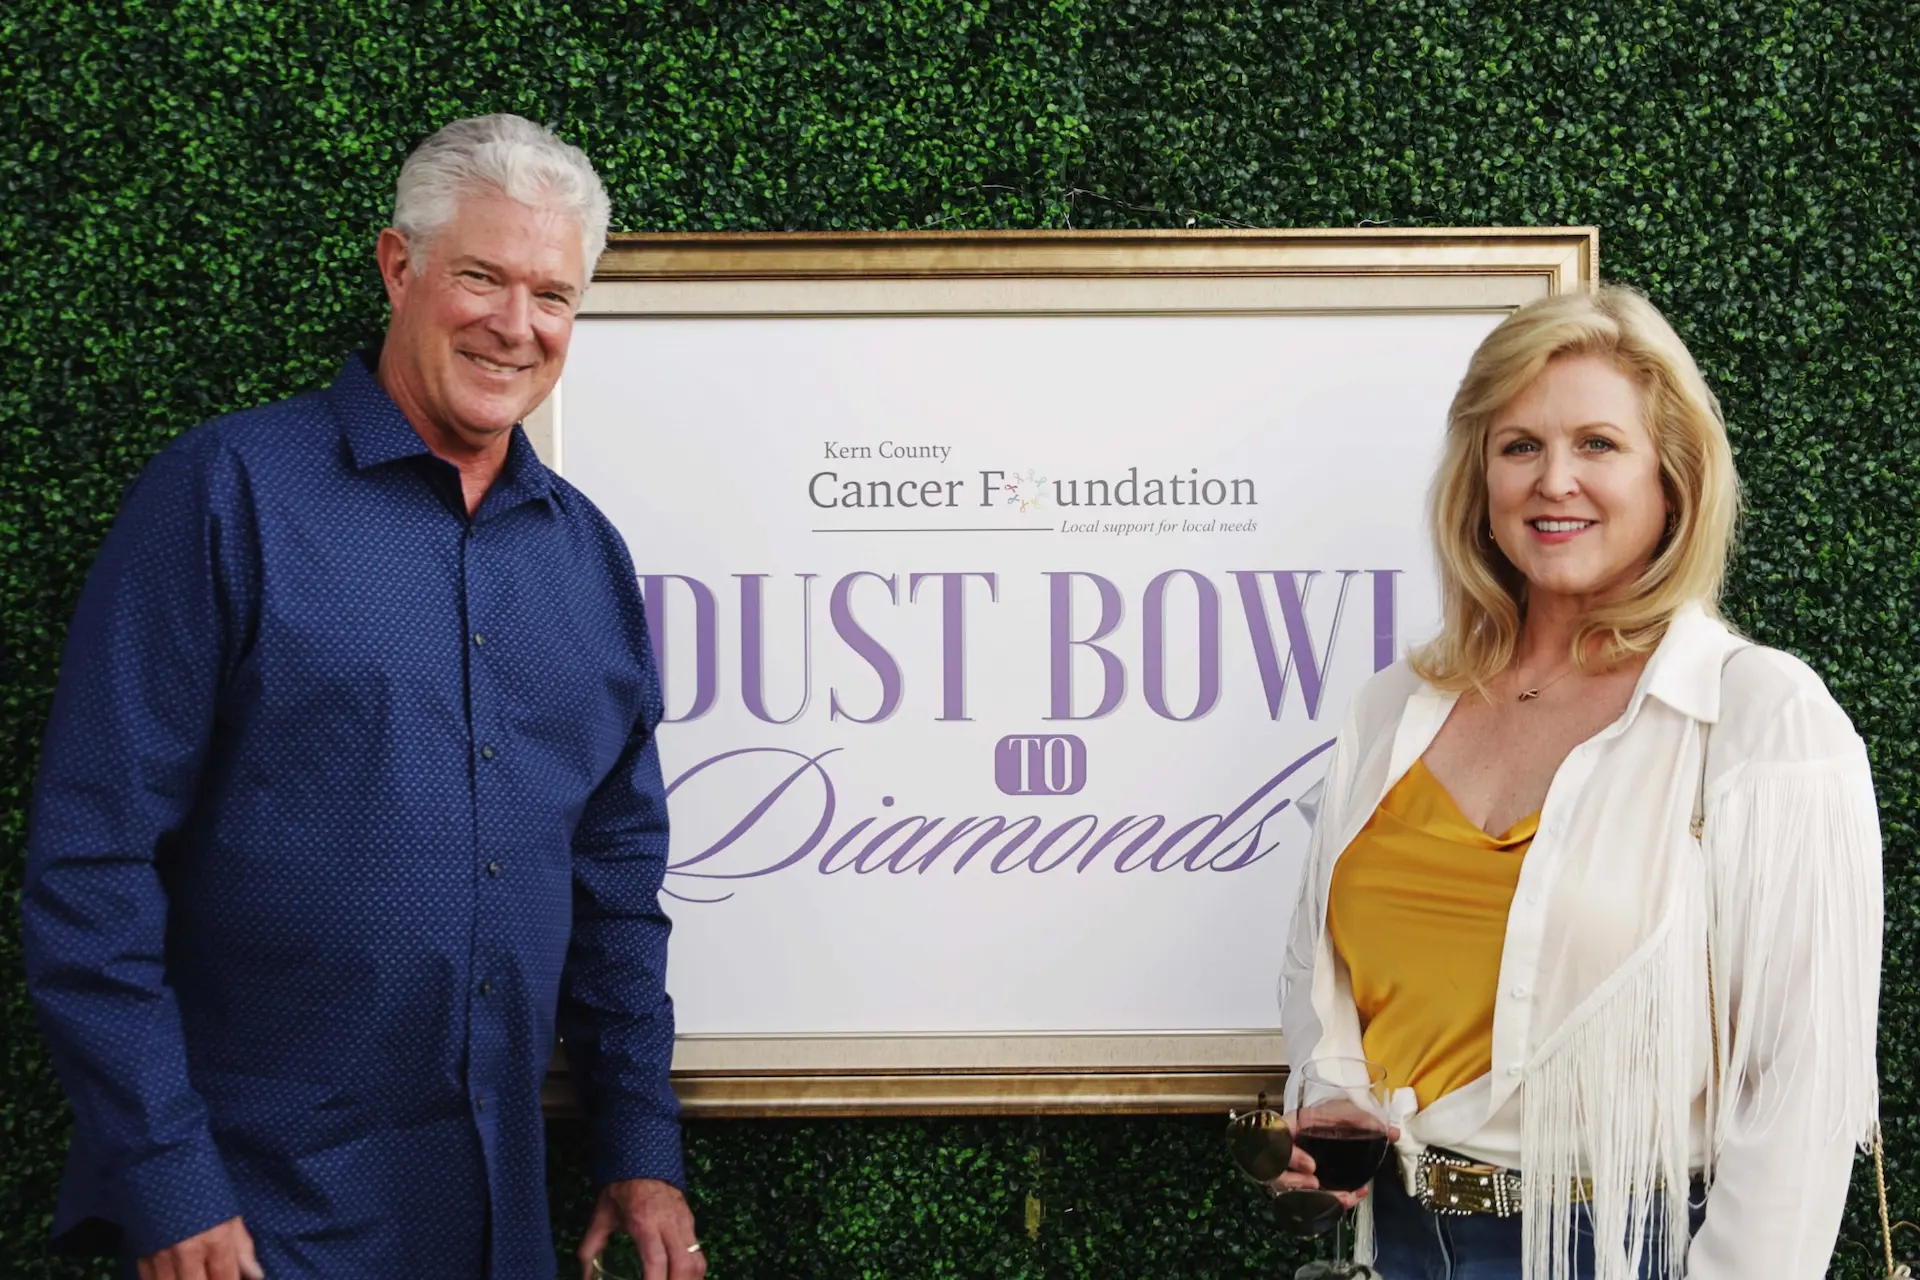 A couple posing in front of the Dust Bowl to Diamonds signage